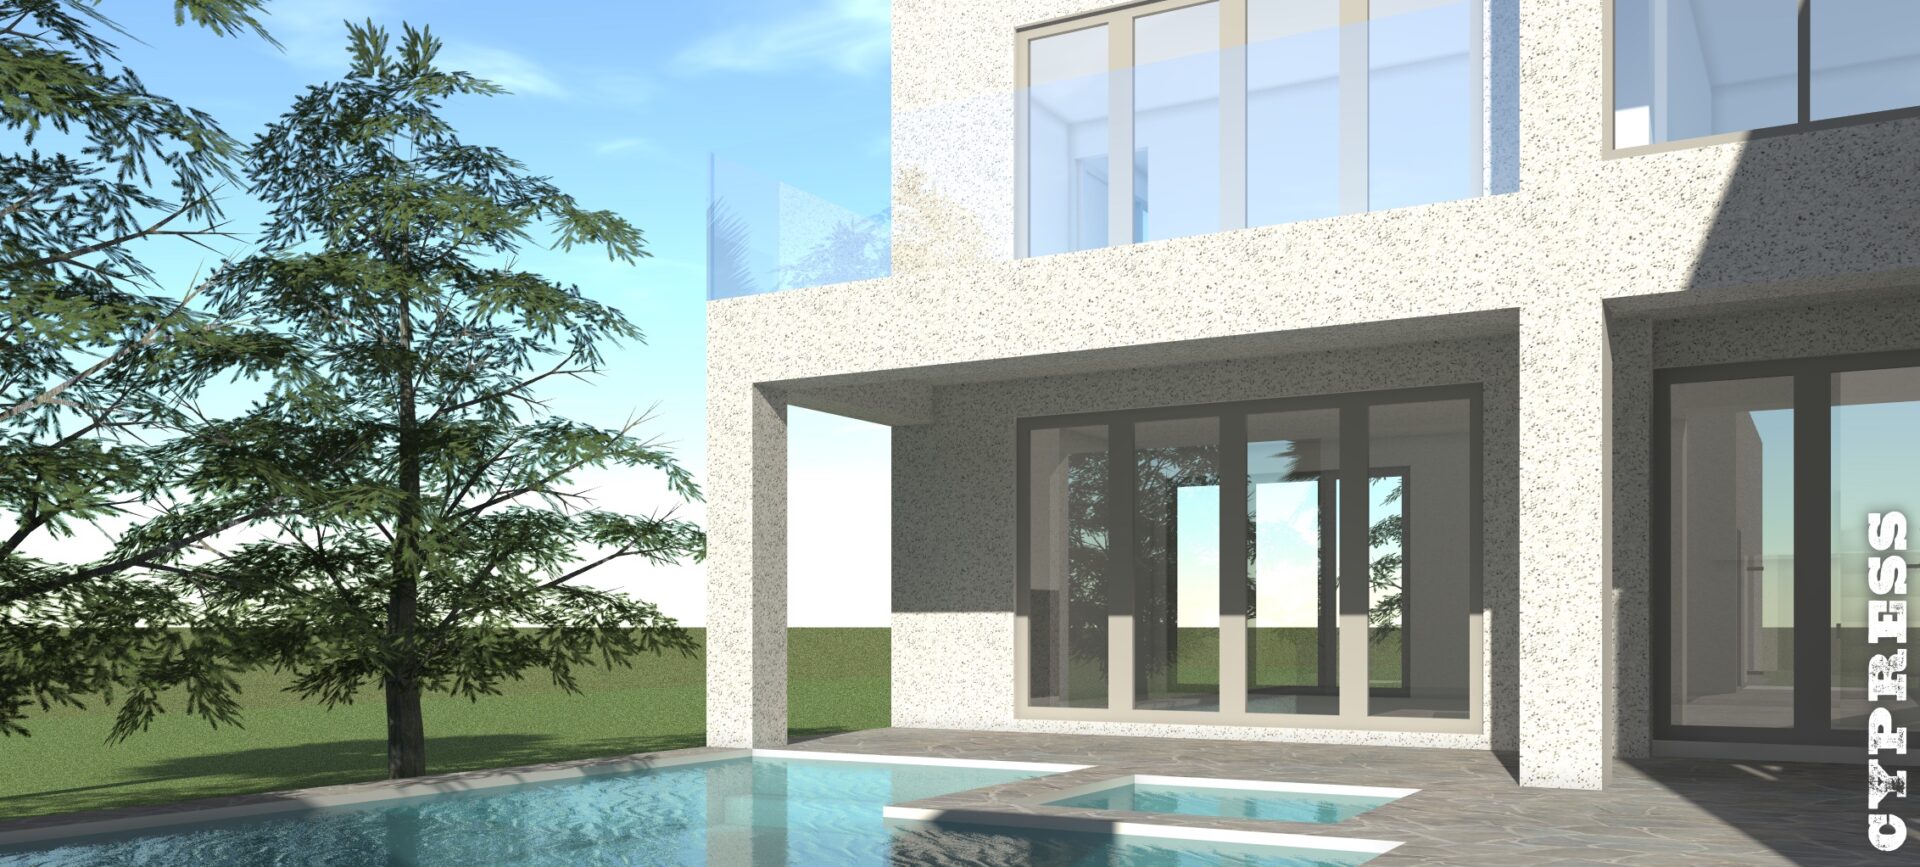 Courtyard pool. Cypress by Tyree House Plans.